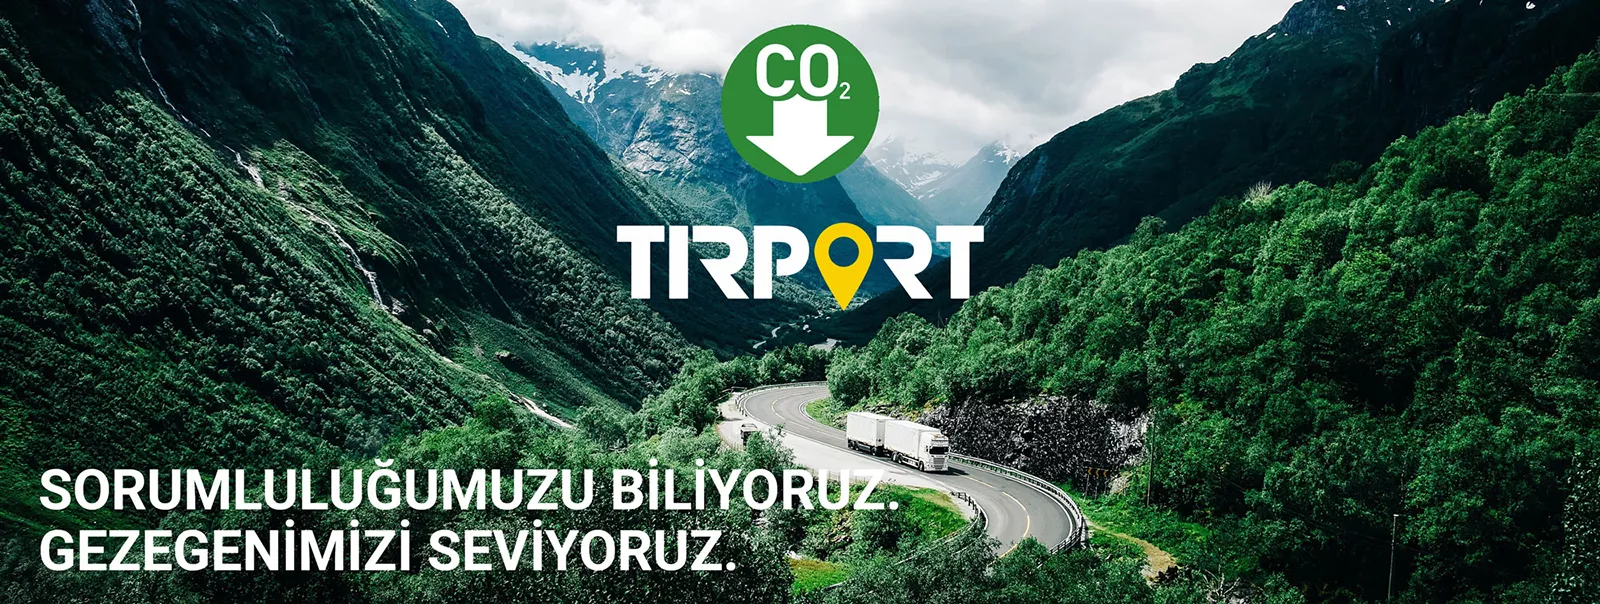 TIRPORT Protects Our Future by Reducing CO2 Emissions!